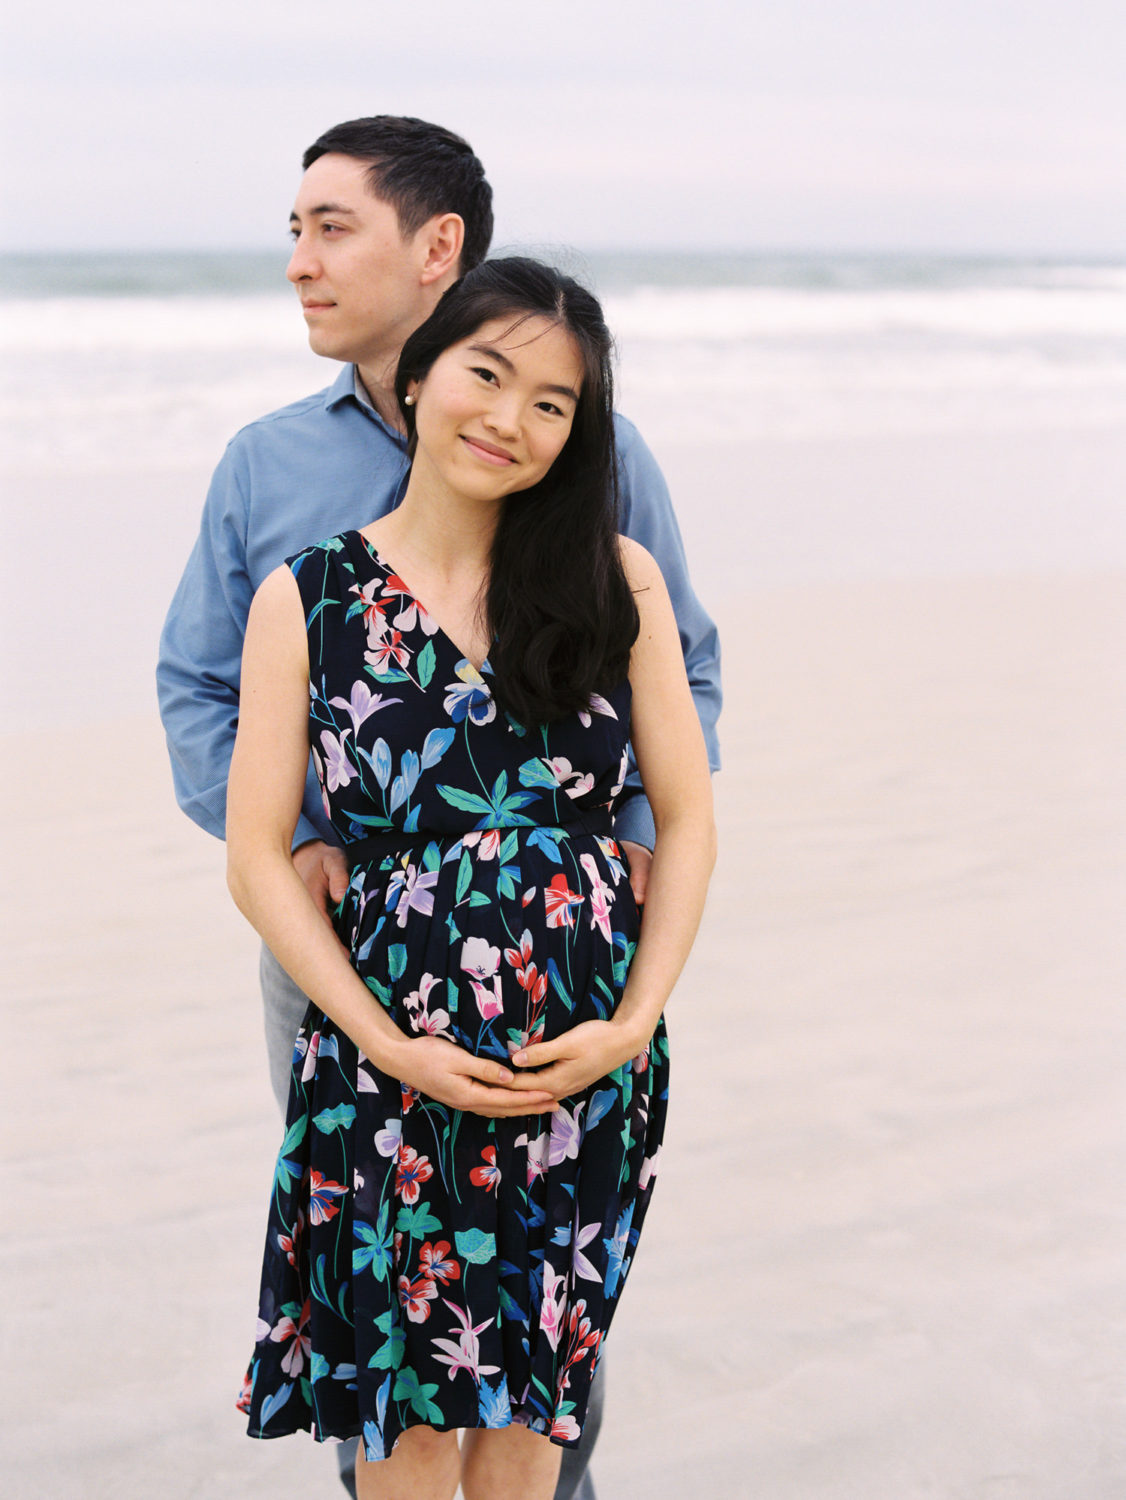 woman with long black hair and multicolored floral dress holding her hands under her pregnant belly and smiling